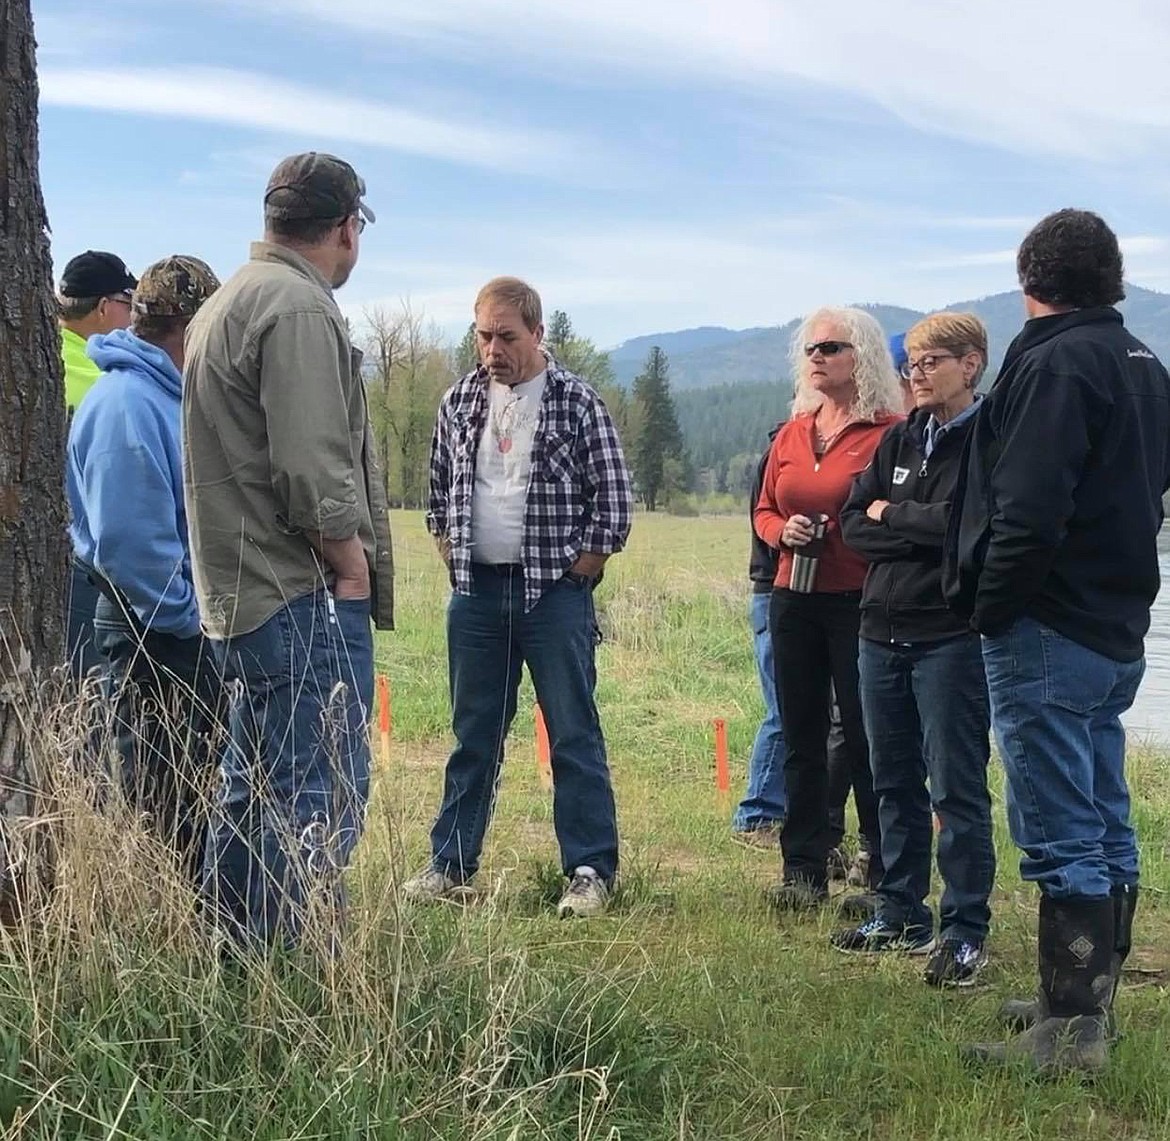 Plains Mayor Danny Rowan, Sanders County Commissioner Carol Brooker and Sanders County Emergency Manager Bill Naegeli meet with other officials to discuss the impending emergency along the banks of the Clark Fork River in Plains last week. (Erin Jusseaume/Clark Fork Valley Press)